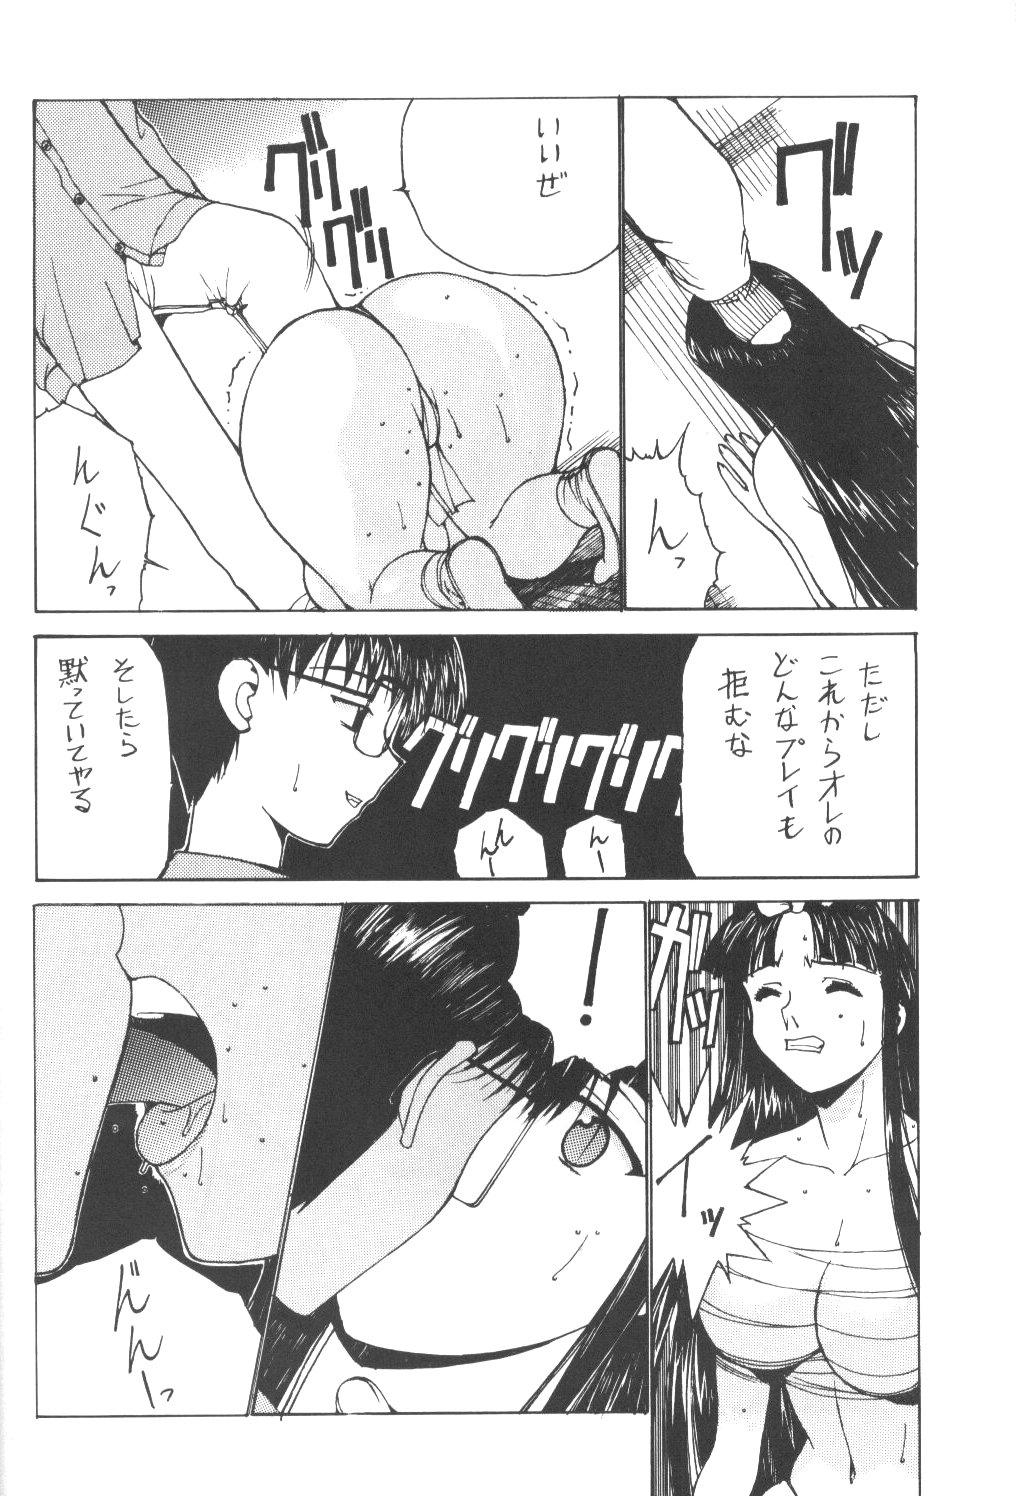 Nut Nadoriino Koufuku Ron - King of fighters Dead or alive Love hina Ass Licking - Page 9